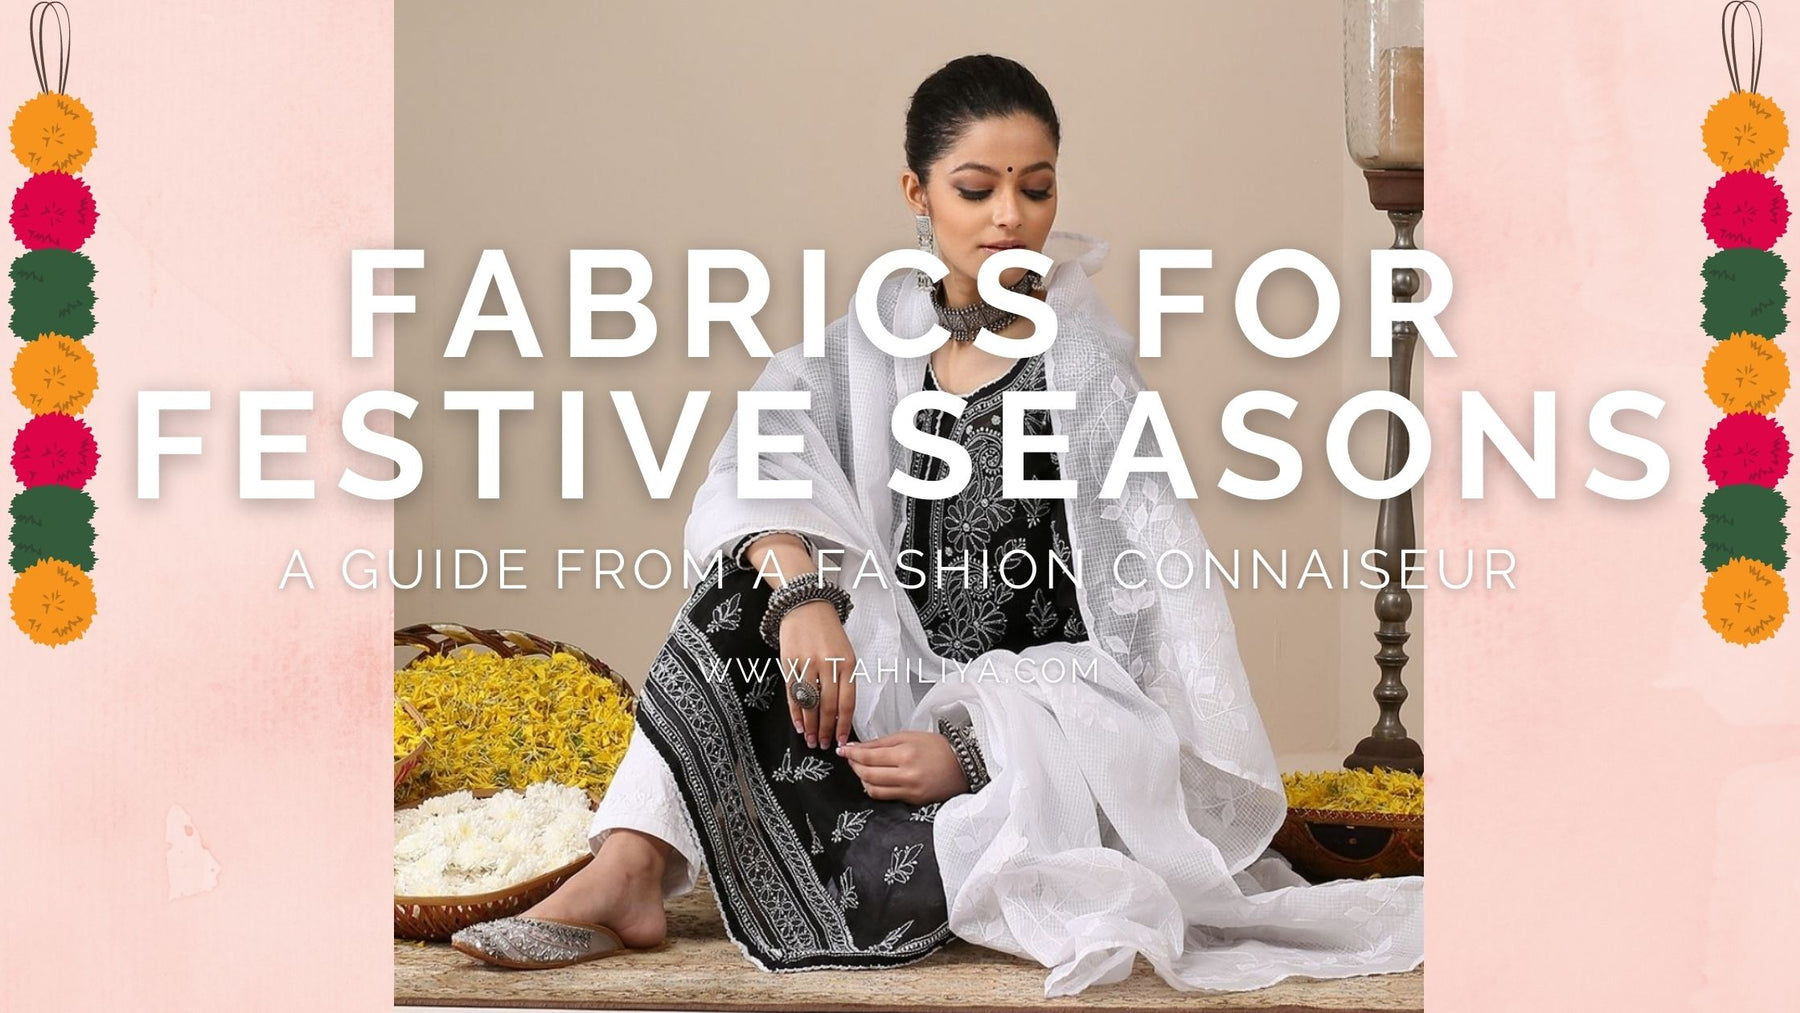 Fabric Which Will Take a Lead for Festive Seasons